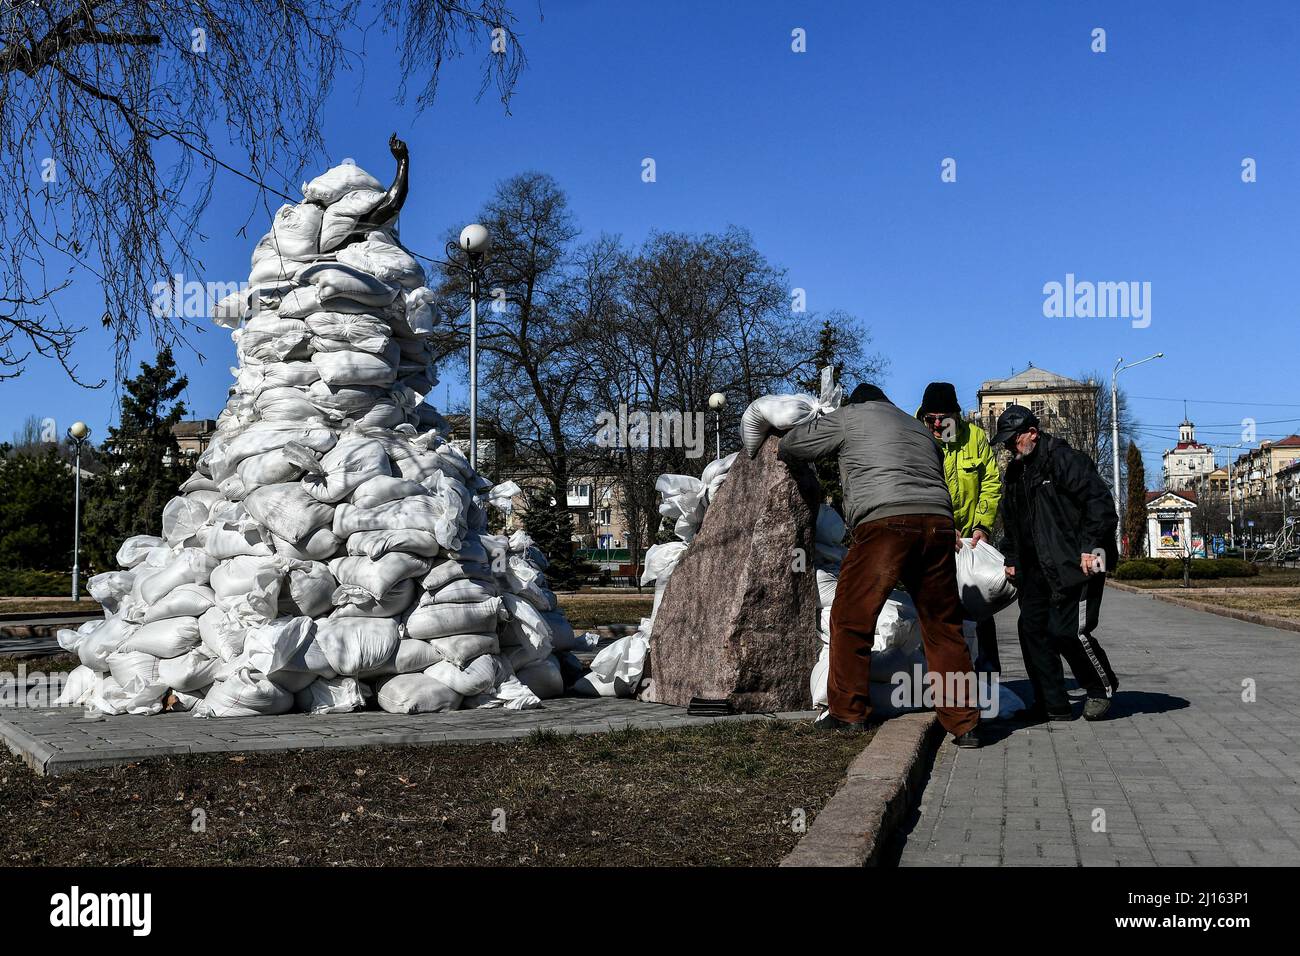 Local volunteers, historians and museum employees put sandbags around the monument to Ukrainian weightlifter, Olympic gold medallist Leonid Zhabotynskyi in a bid to protect the statue from damage in case of Russian attacks, Zaporizhzhia, southeastern Ukraine, March 22, 2022. Photo by Dmytro Smoliyenko/Ukrinform/ABACAPRESS.COM Stock Photo